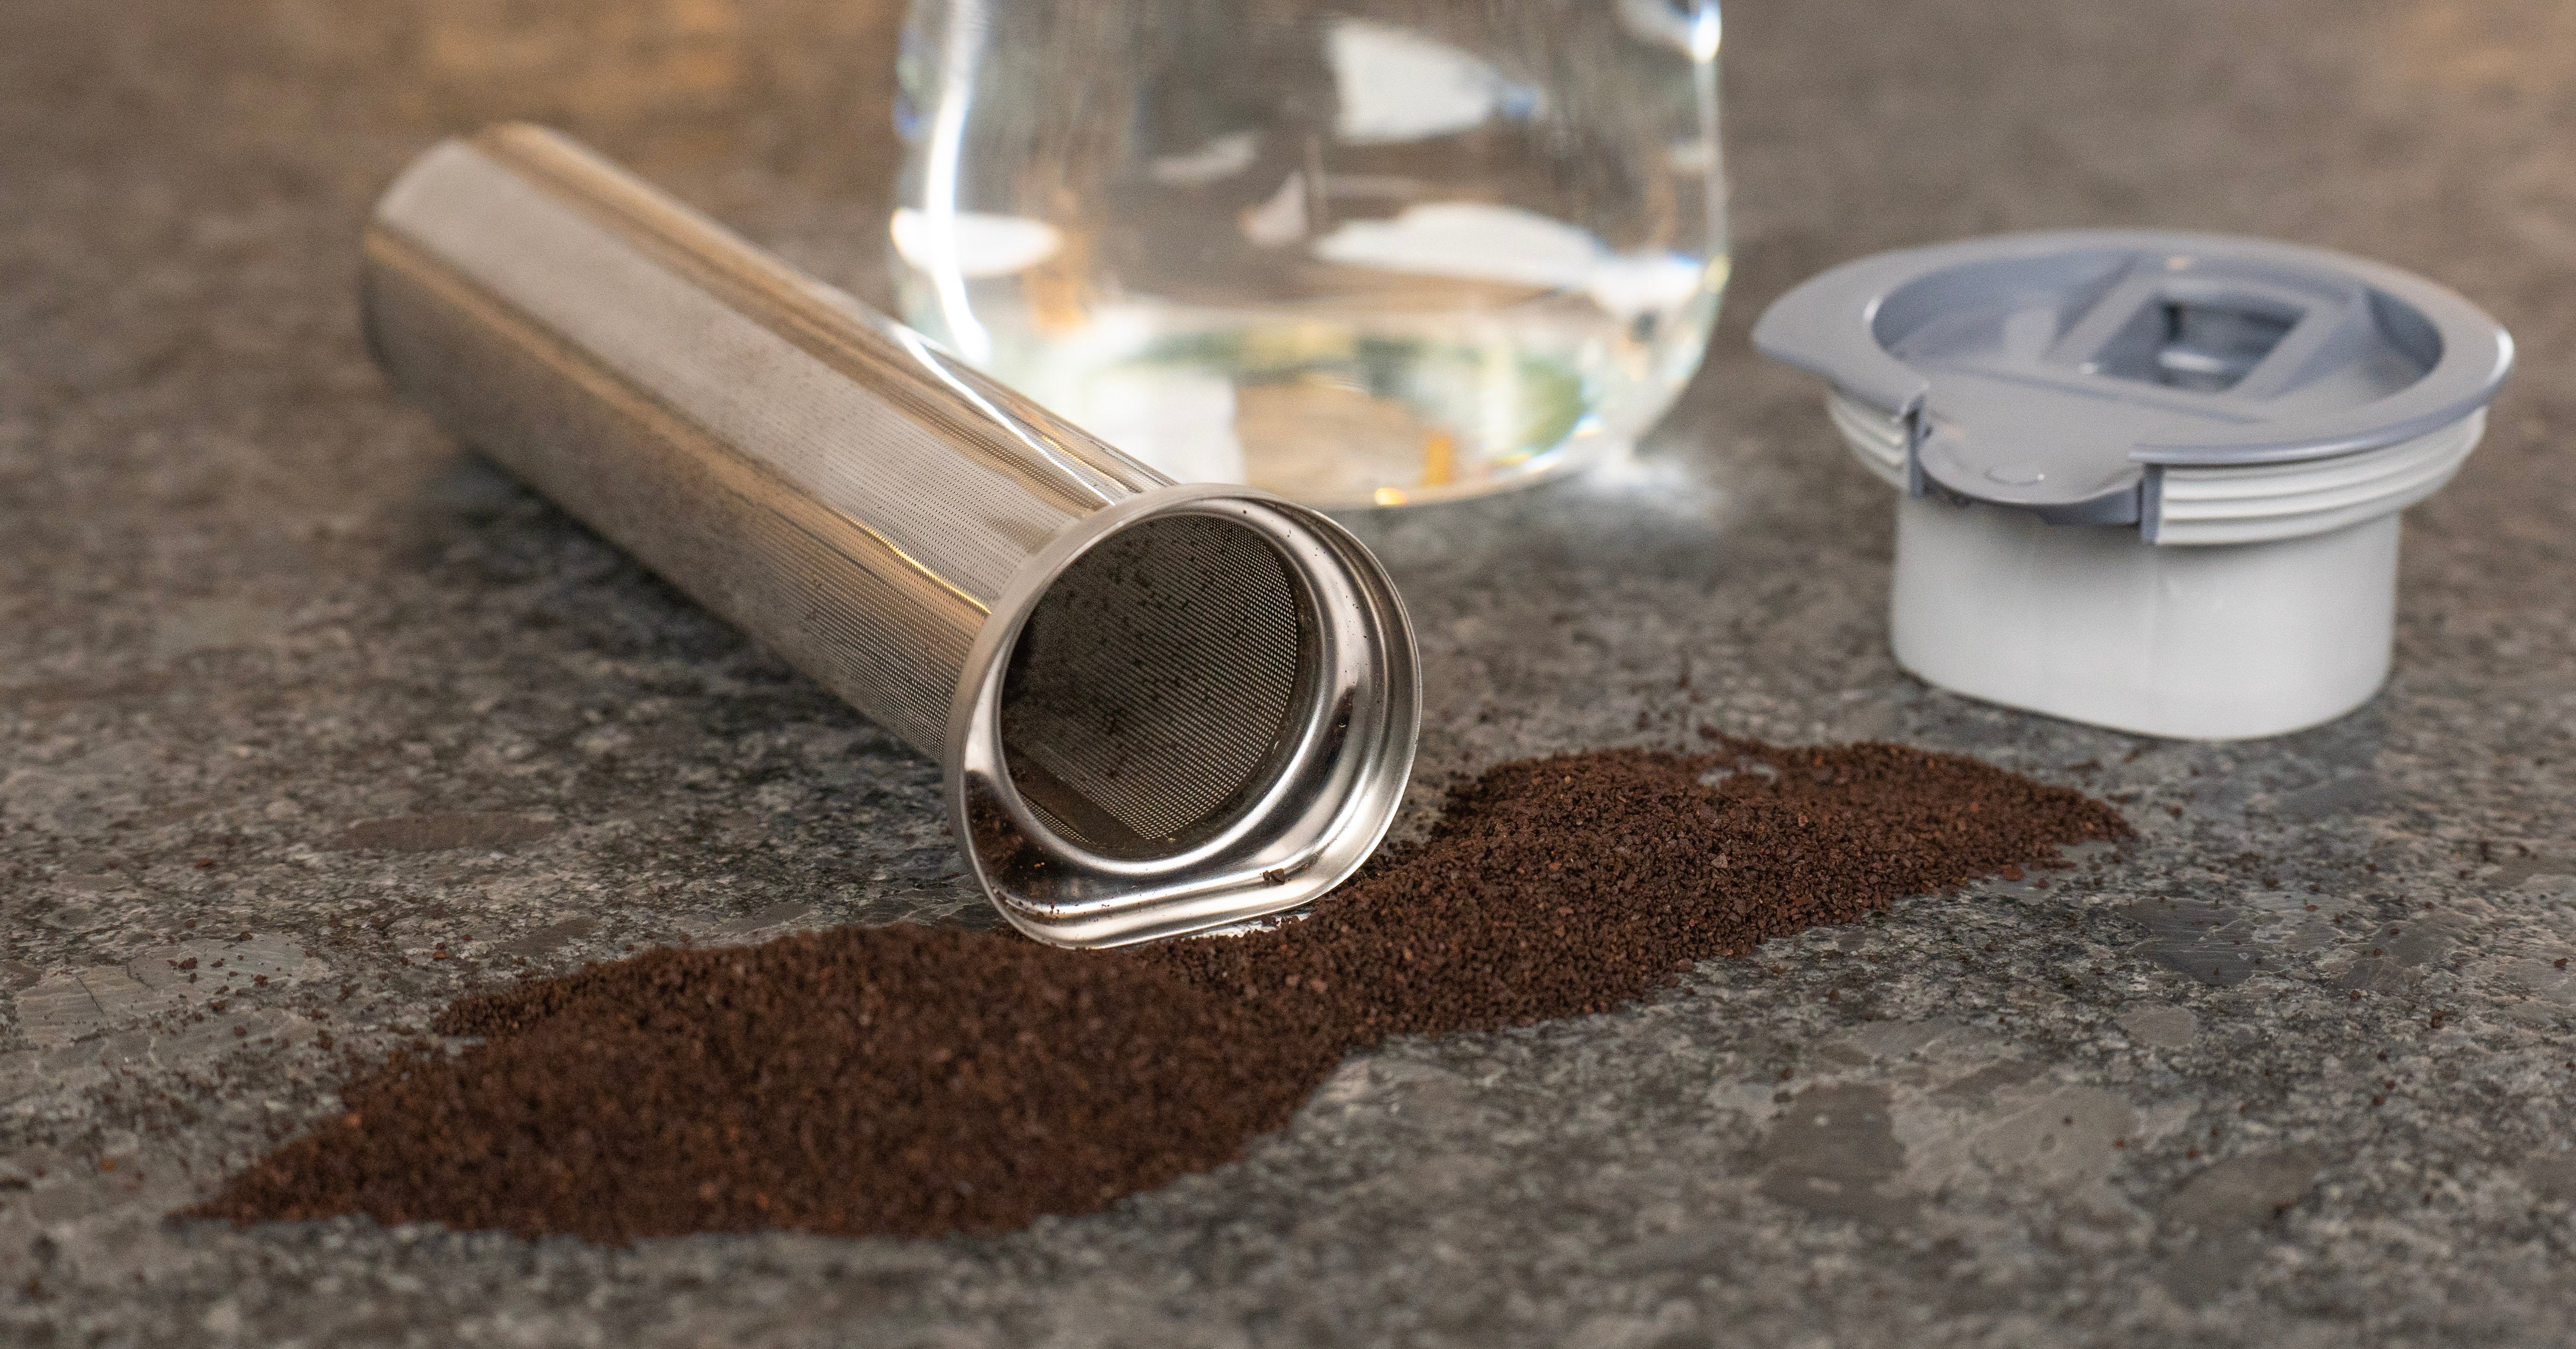 This steel infuser for cold brew is long-lasting and sustainable